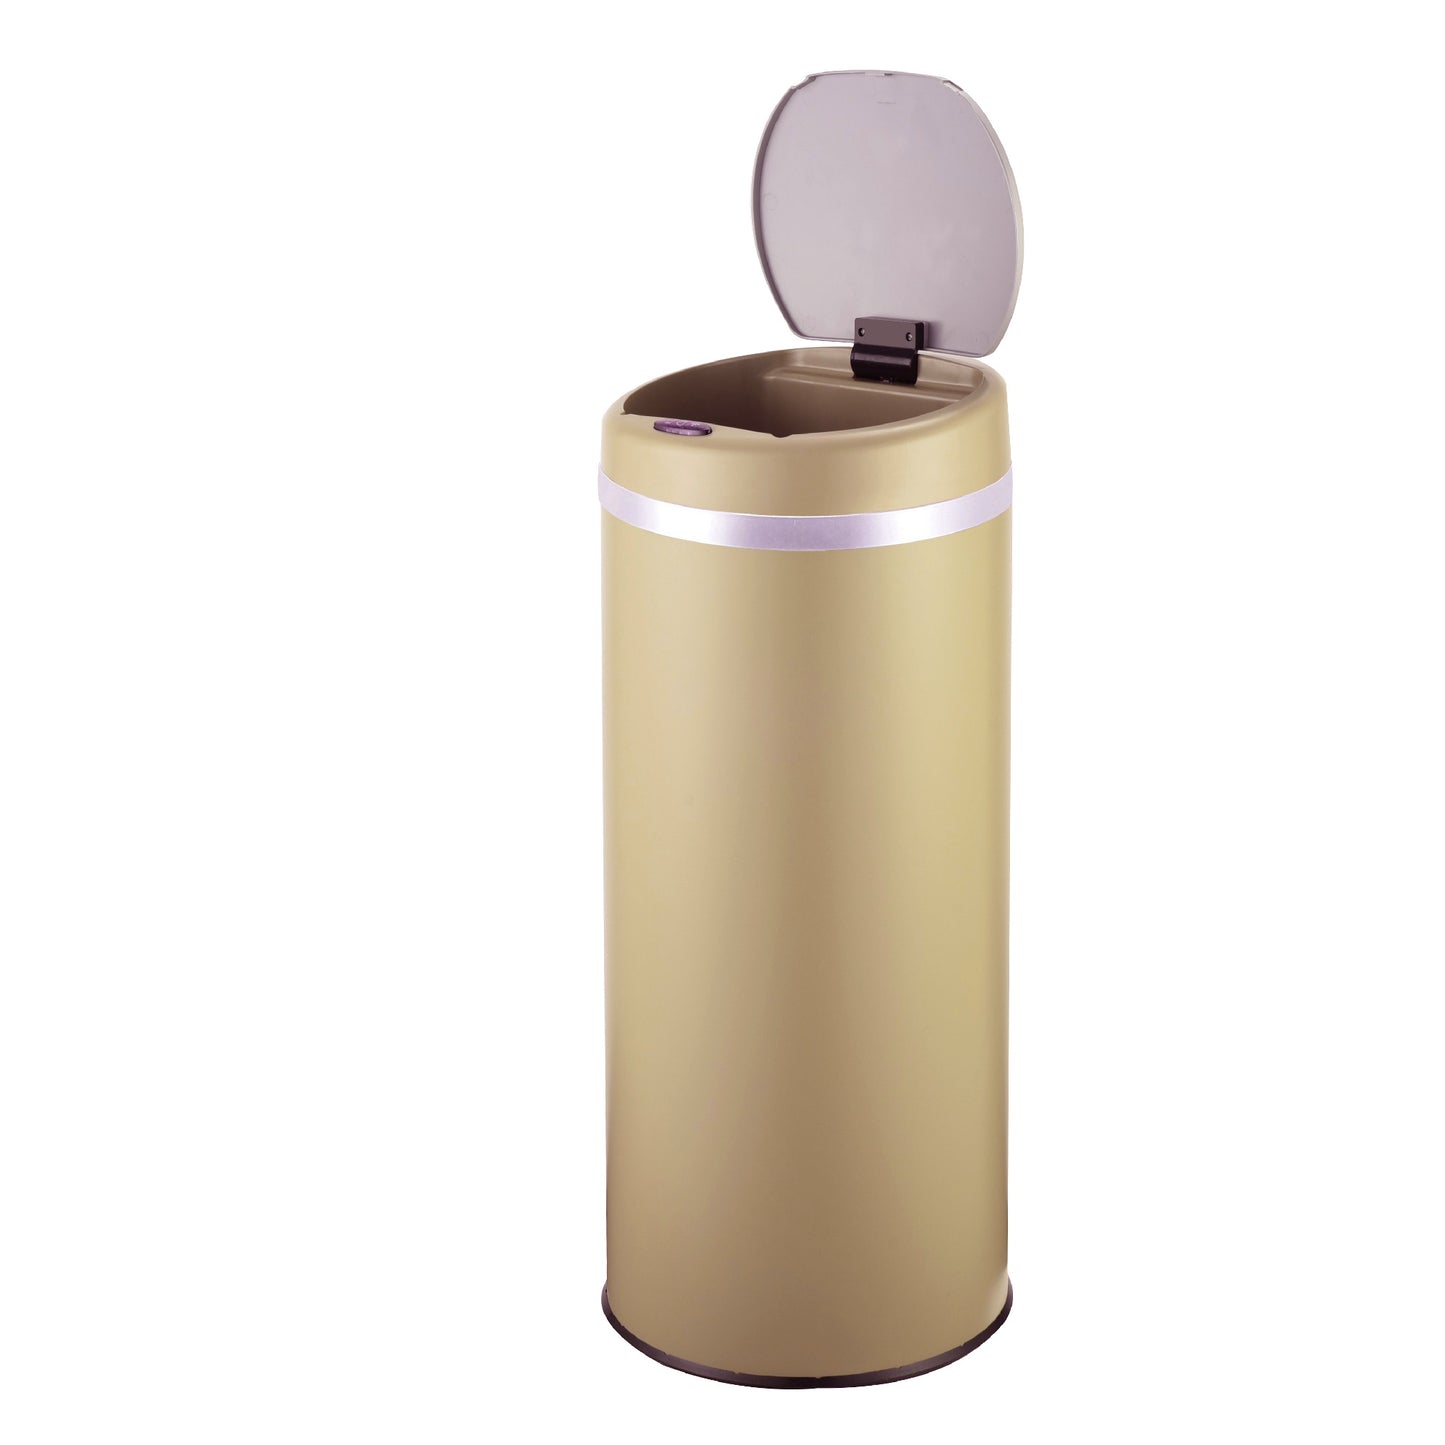 Automatic kitchen bin 42L SOHO Taupe matte in stainless steel with strapping